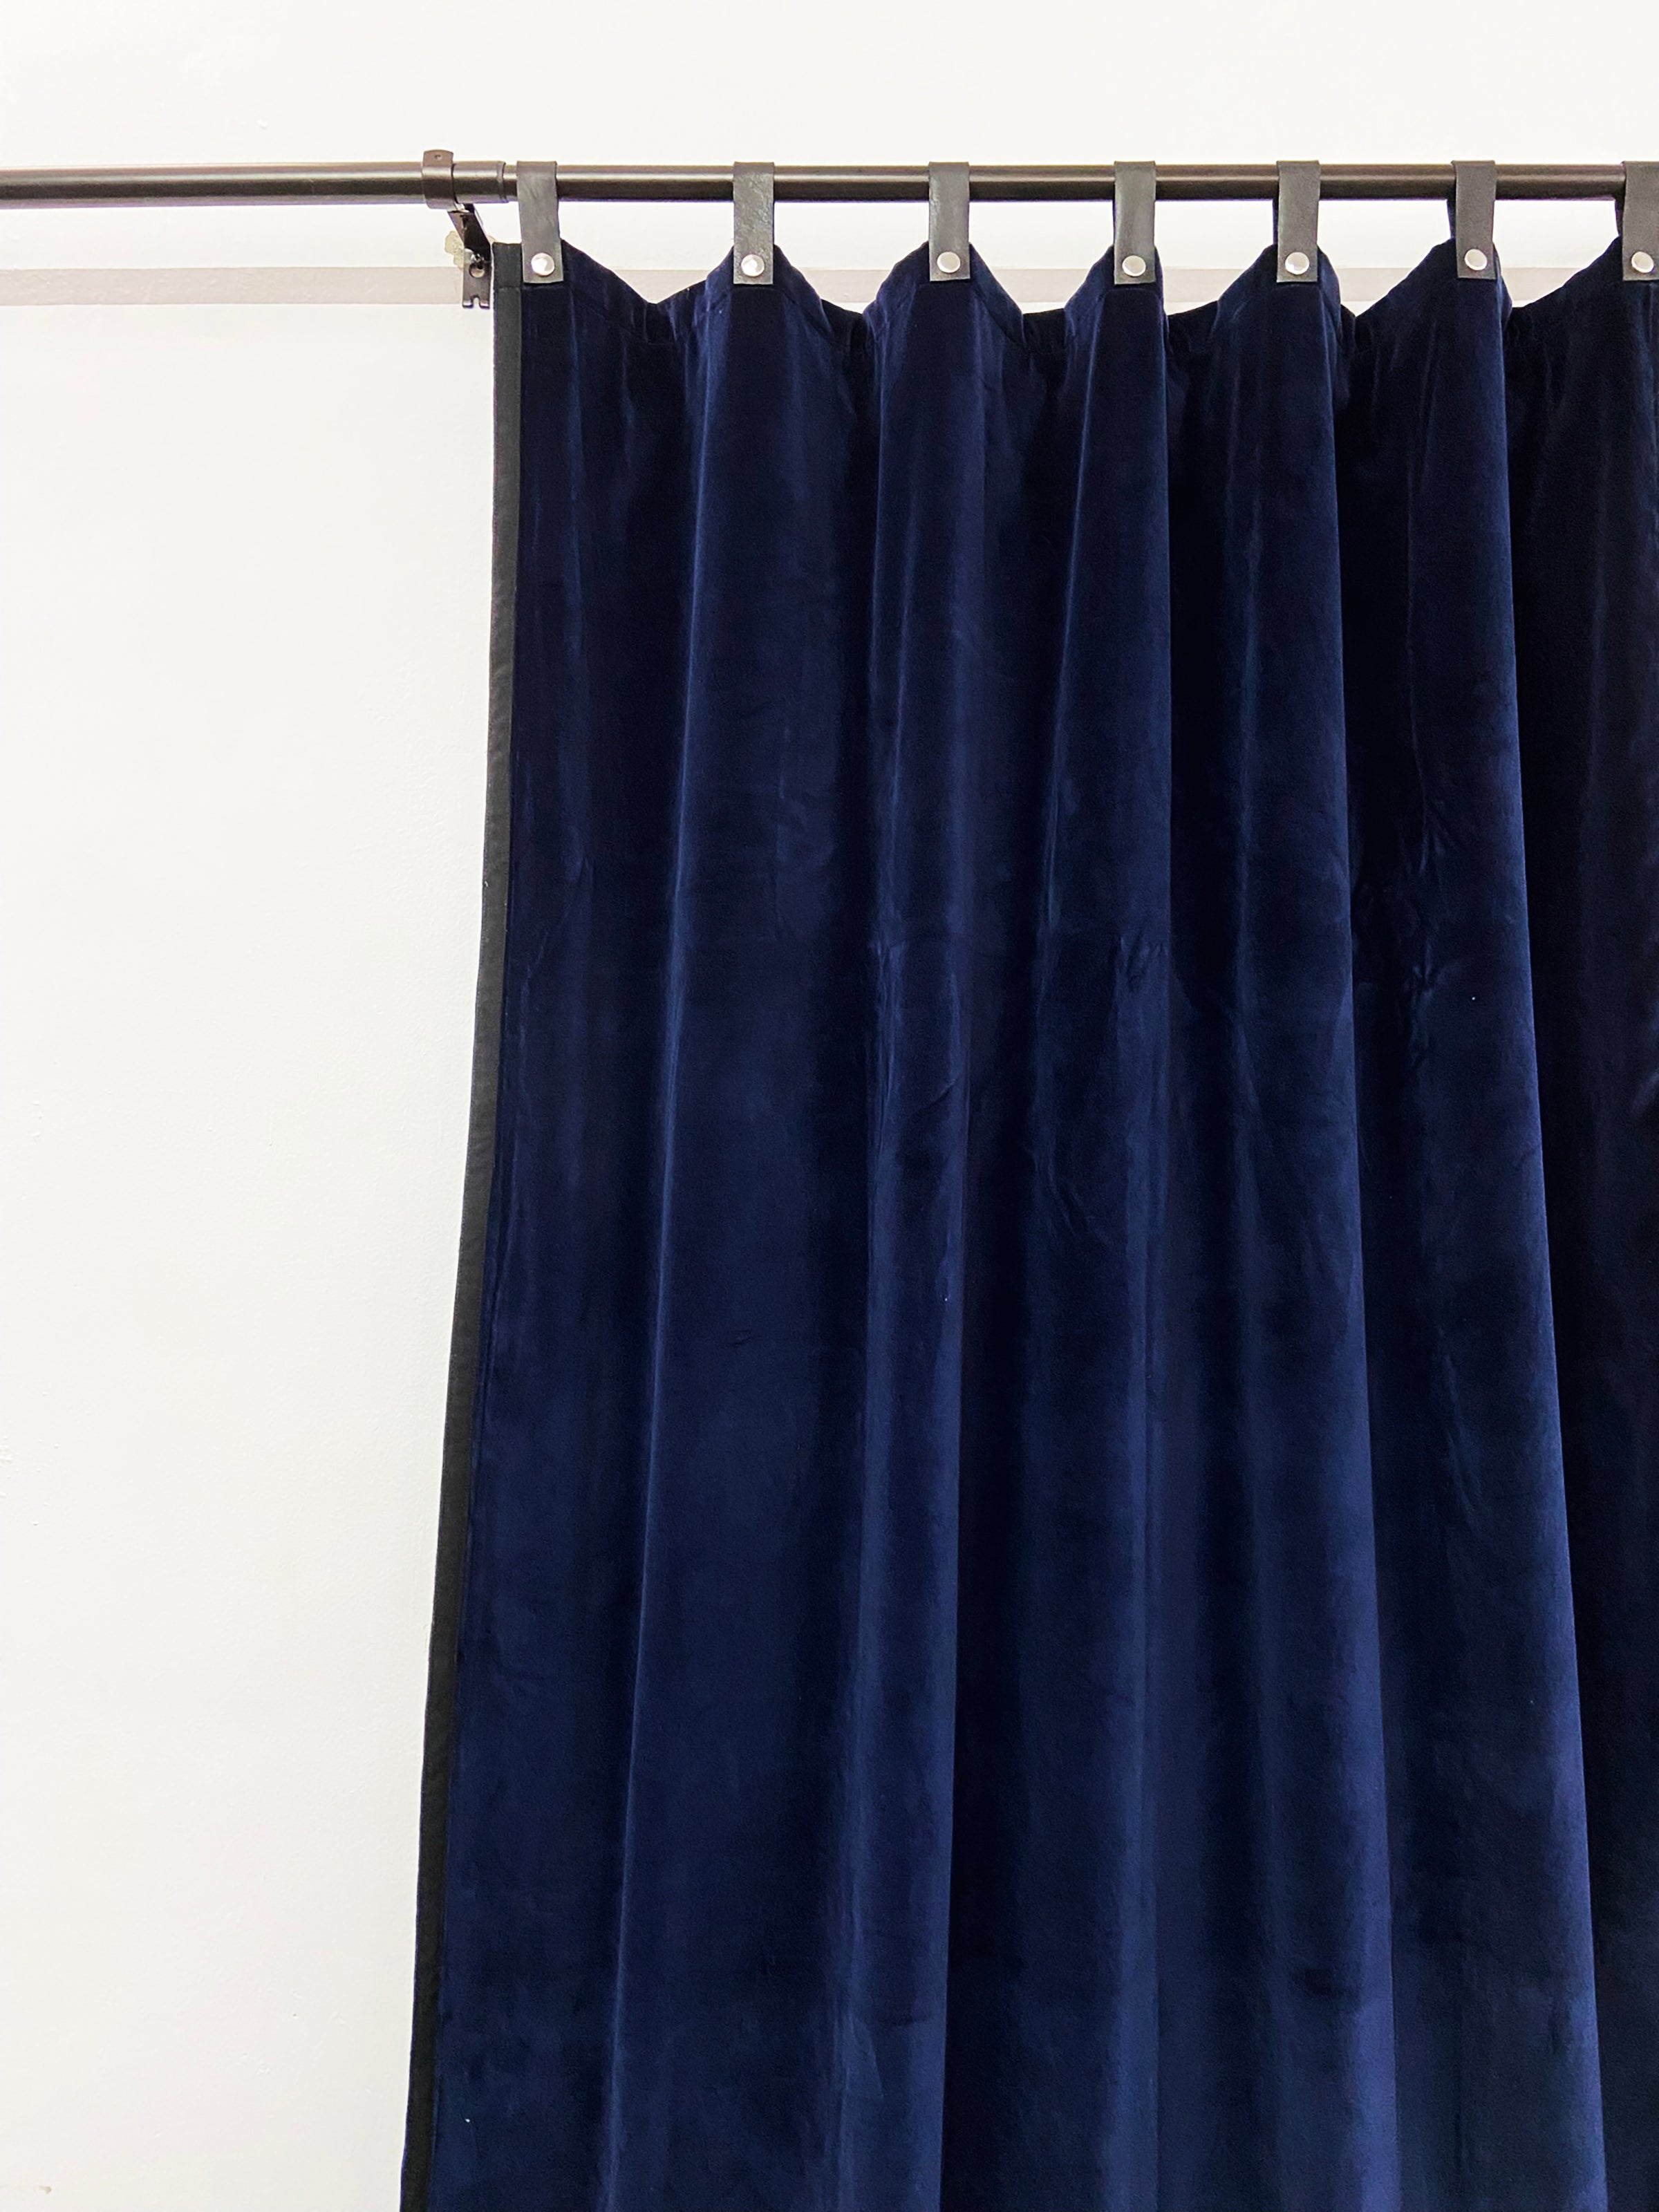 Amore Beaute Window and door curtains in premium cotton velvet fabric finished with cotton trim.